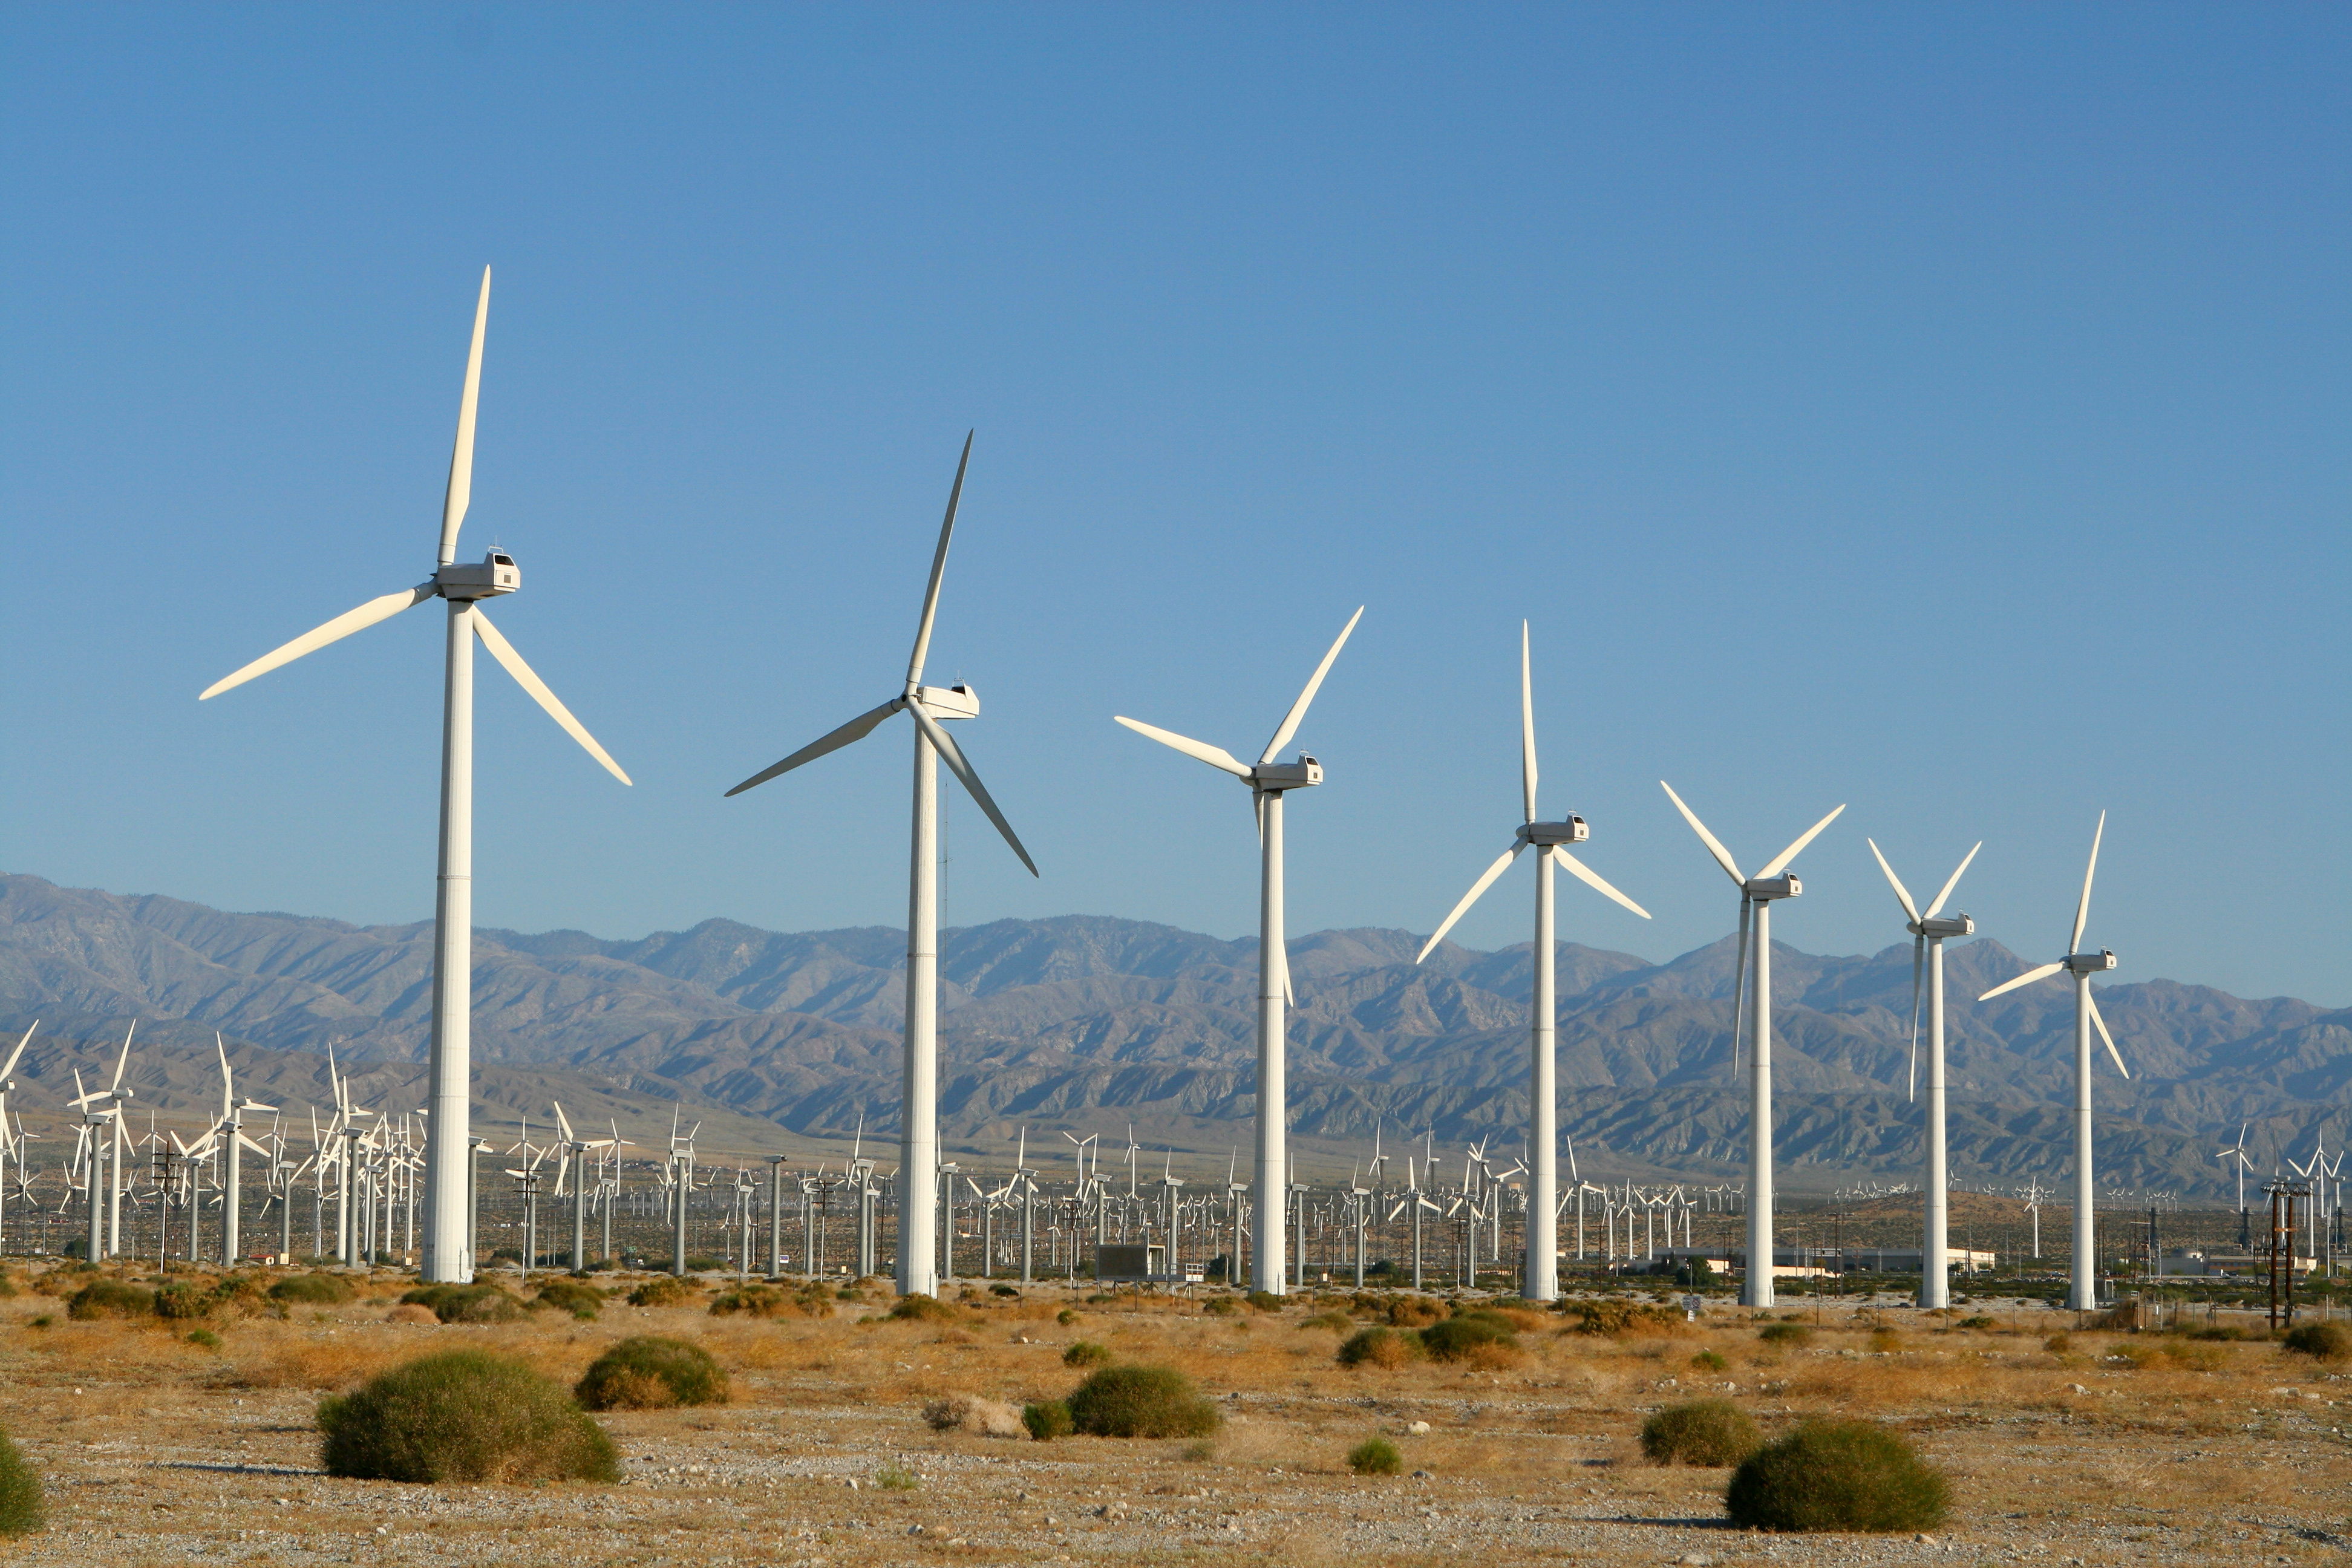 Operational condition of wind turbines in California for 86% of the time in first quarter of 2015. Image courtesy of DollarPhotoClub.com